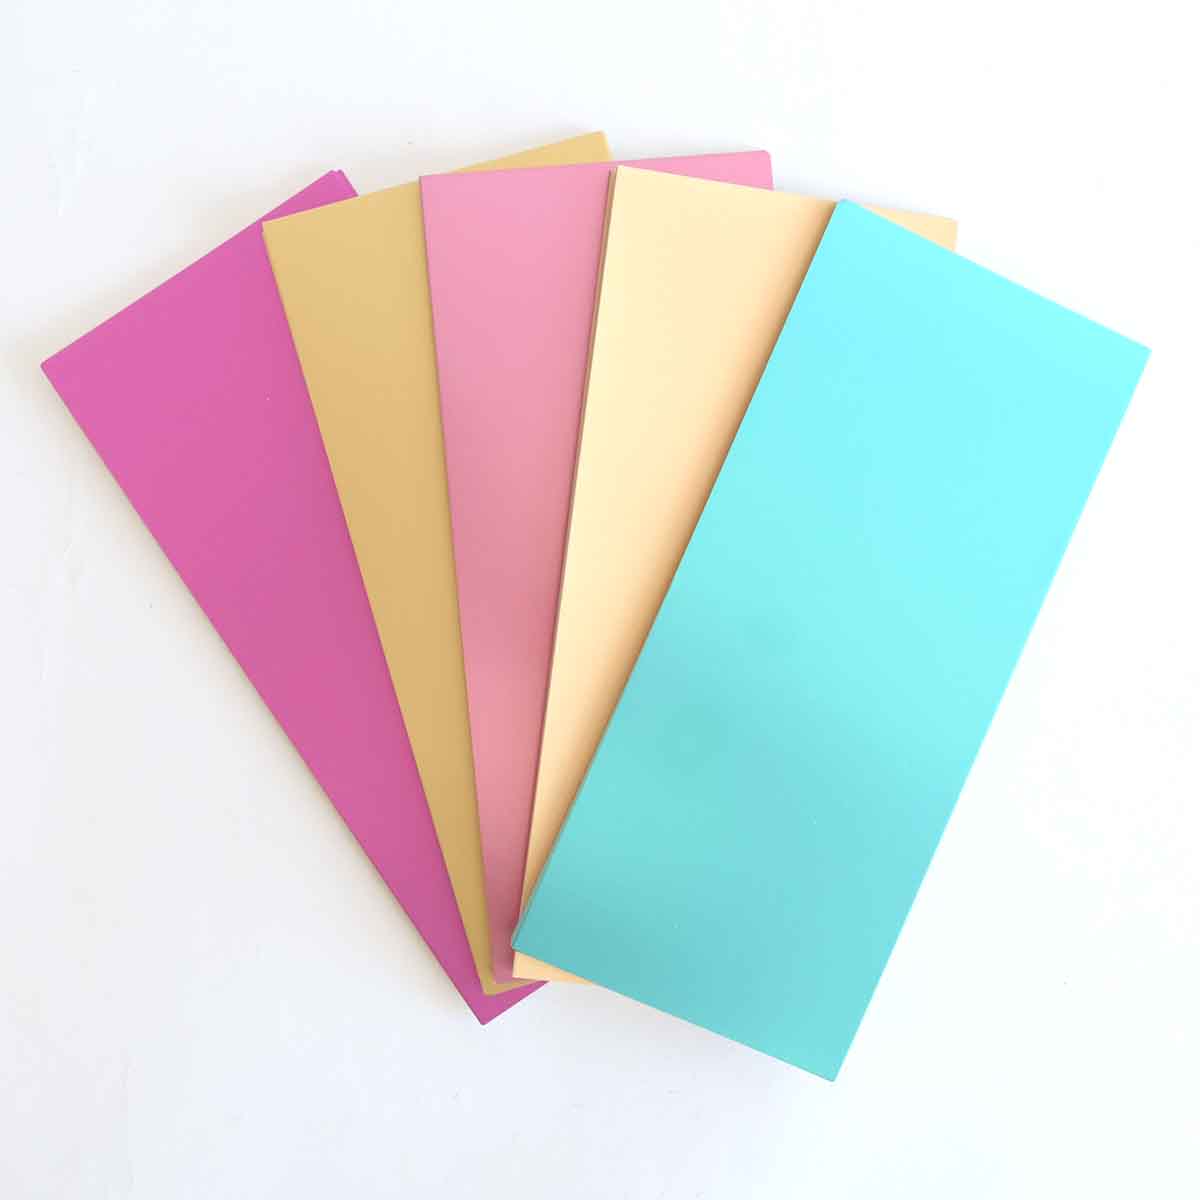 five different colored sheets of paper on a white surface.